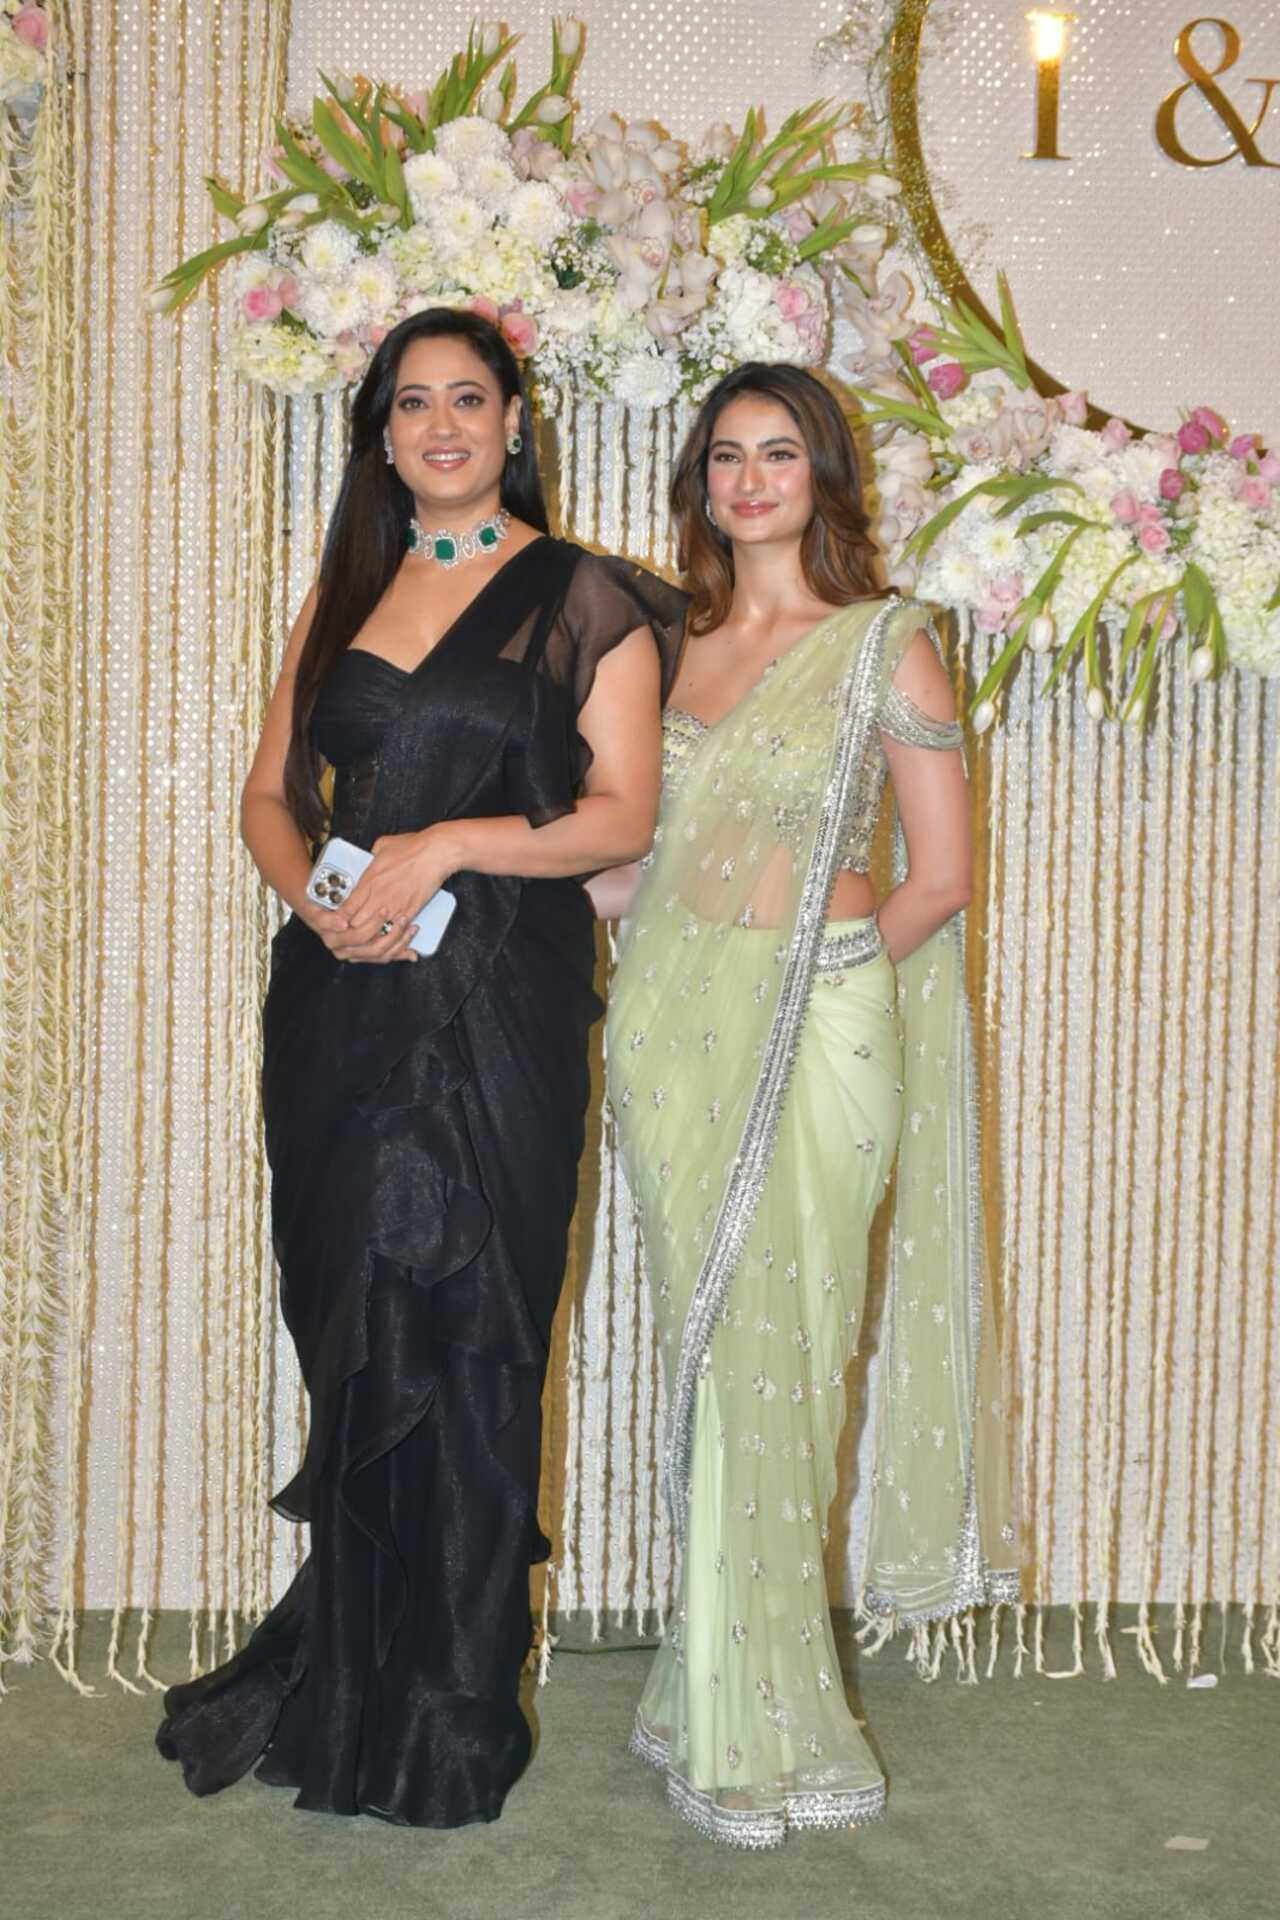 Mother-daughter duo Shweta Tiwari and Palak Tiwari dazzled in their saree look. While Shweta opted for a black saree with emerald necklace, Palak went for a pastel green sheer saree